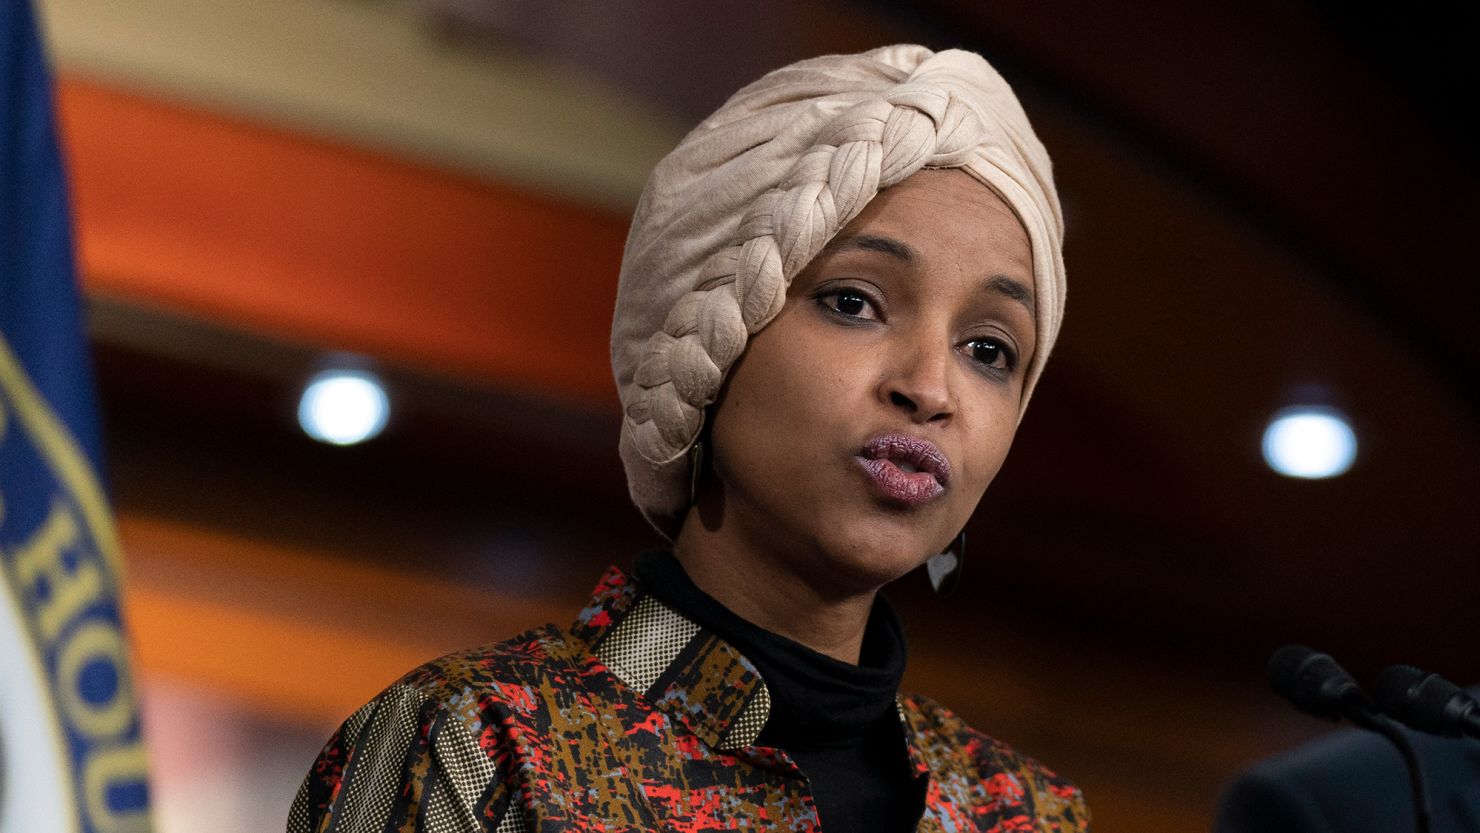 Rep. Ilhan Omar, a Democrat from Minnesota, speaks during a news conference on Capitol Hill in Washington on January. 25.